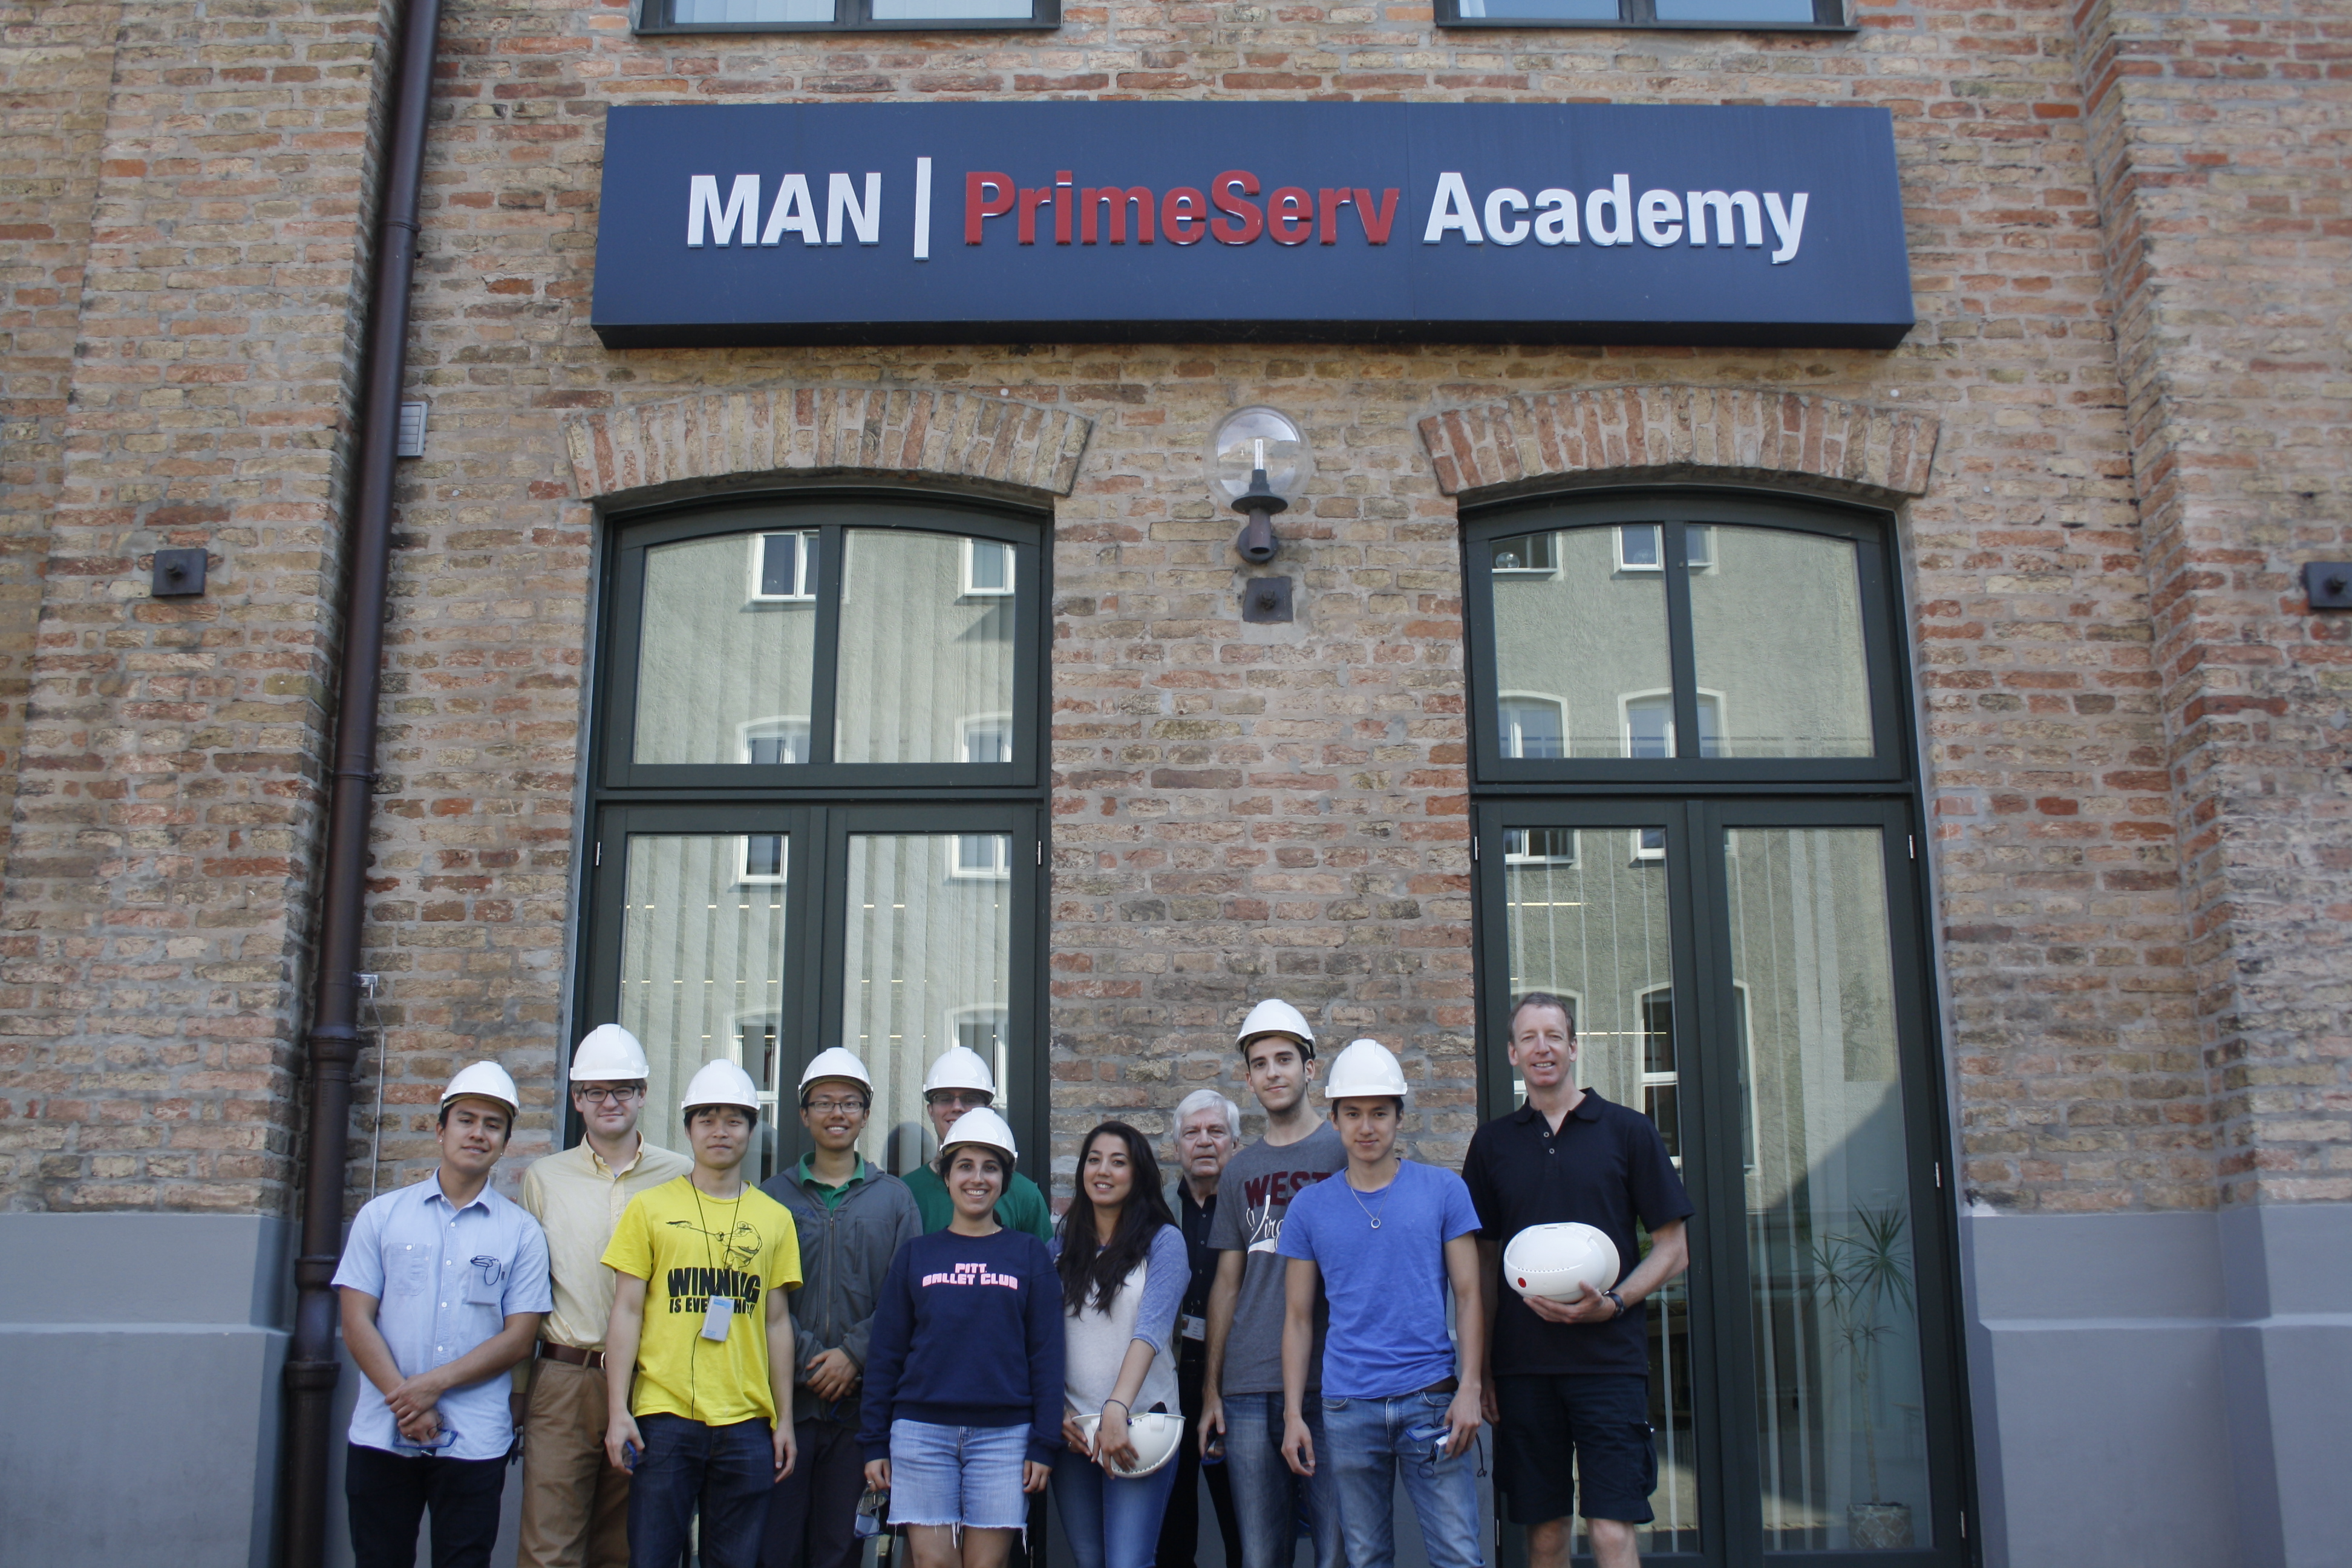 Students on a summer school trip to MAN PrimeServ Academy, standing in front of the companys sign 